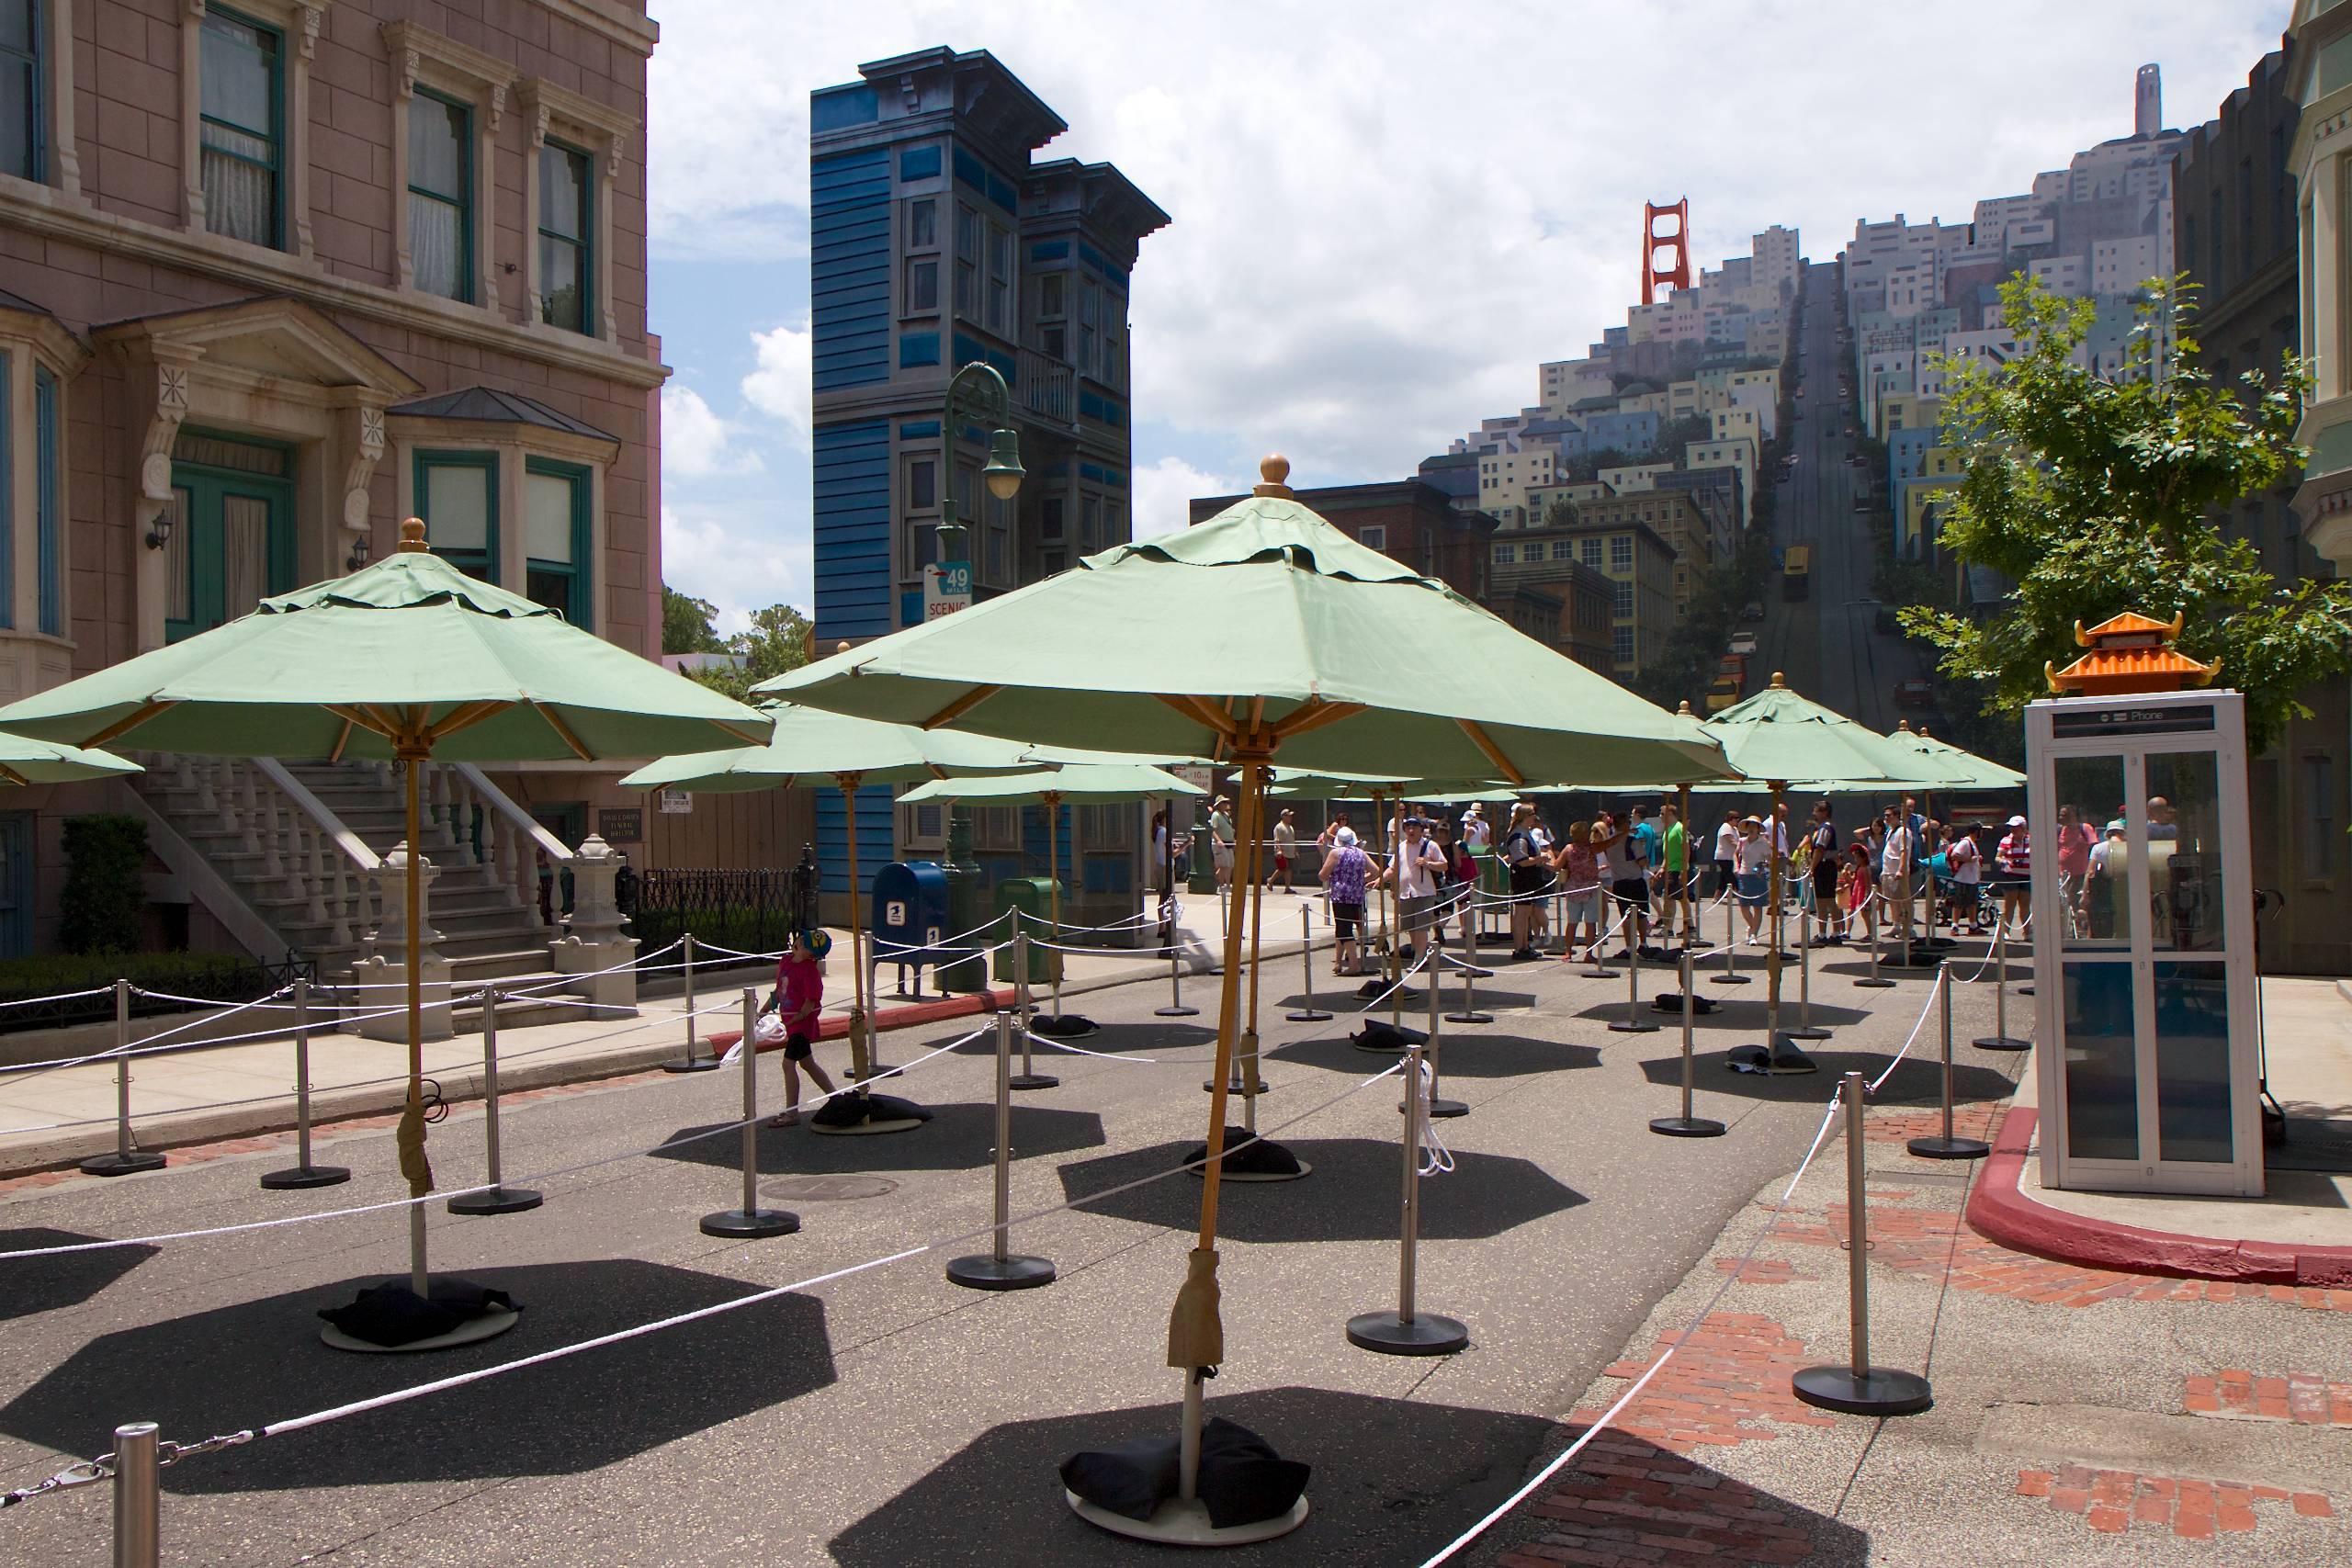 Frozen Summer Fun - For The First Time in Forever: A Frozen Sing-Along Celebration queue area